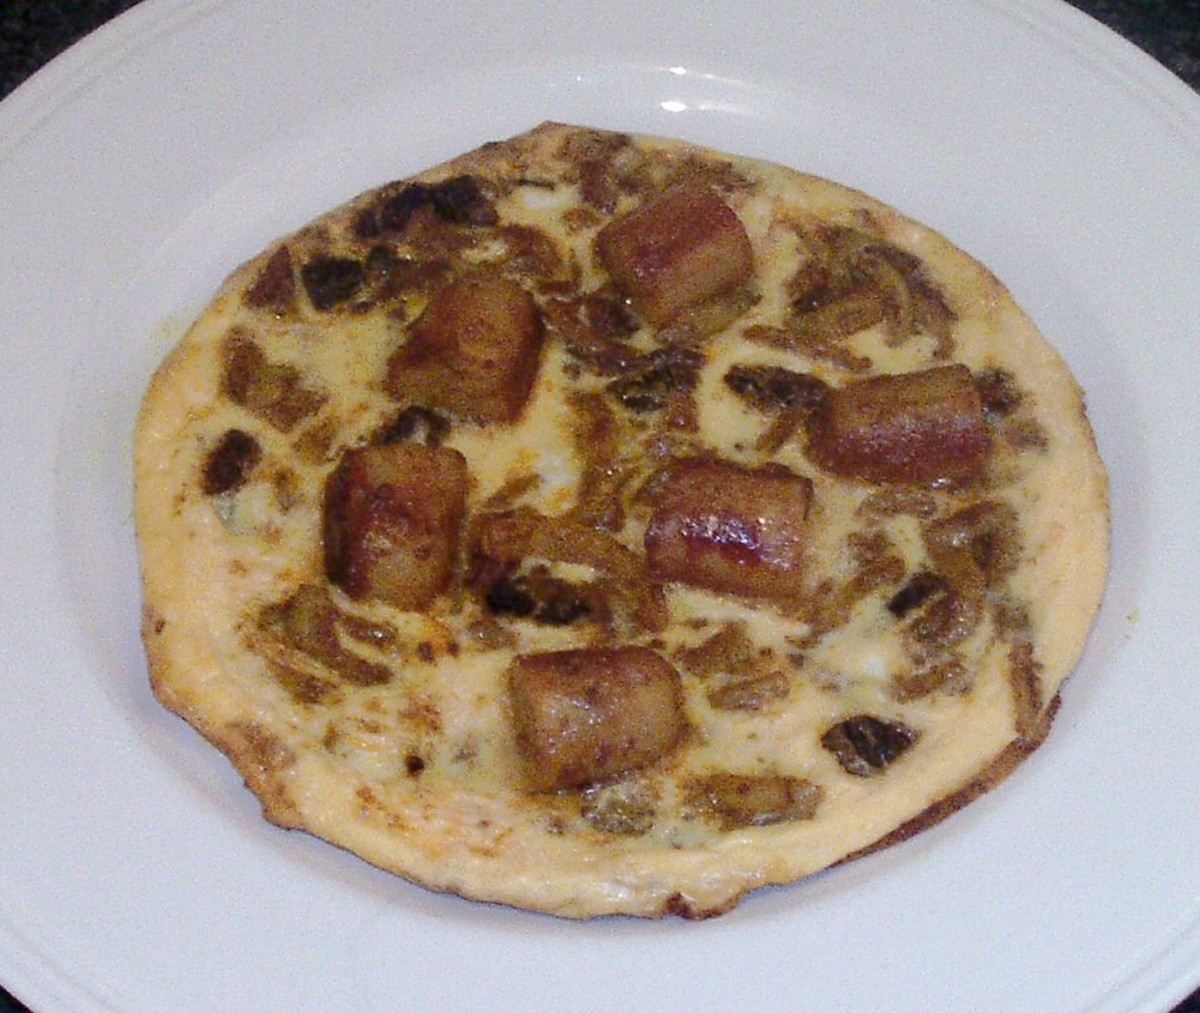 Curried chicken sausages in a Spanish style tortilla